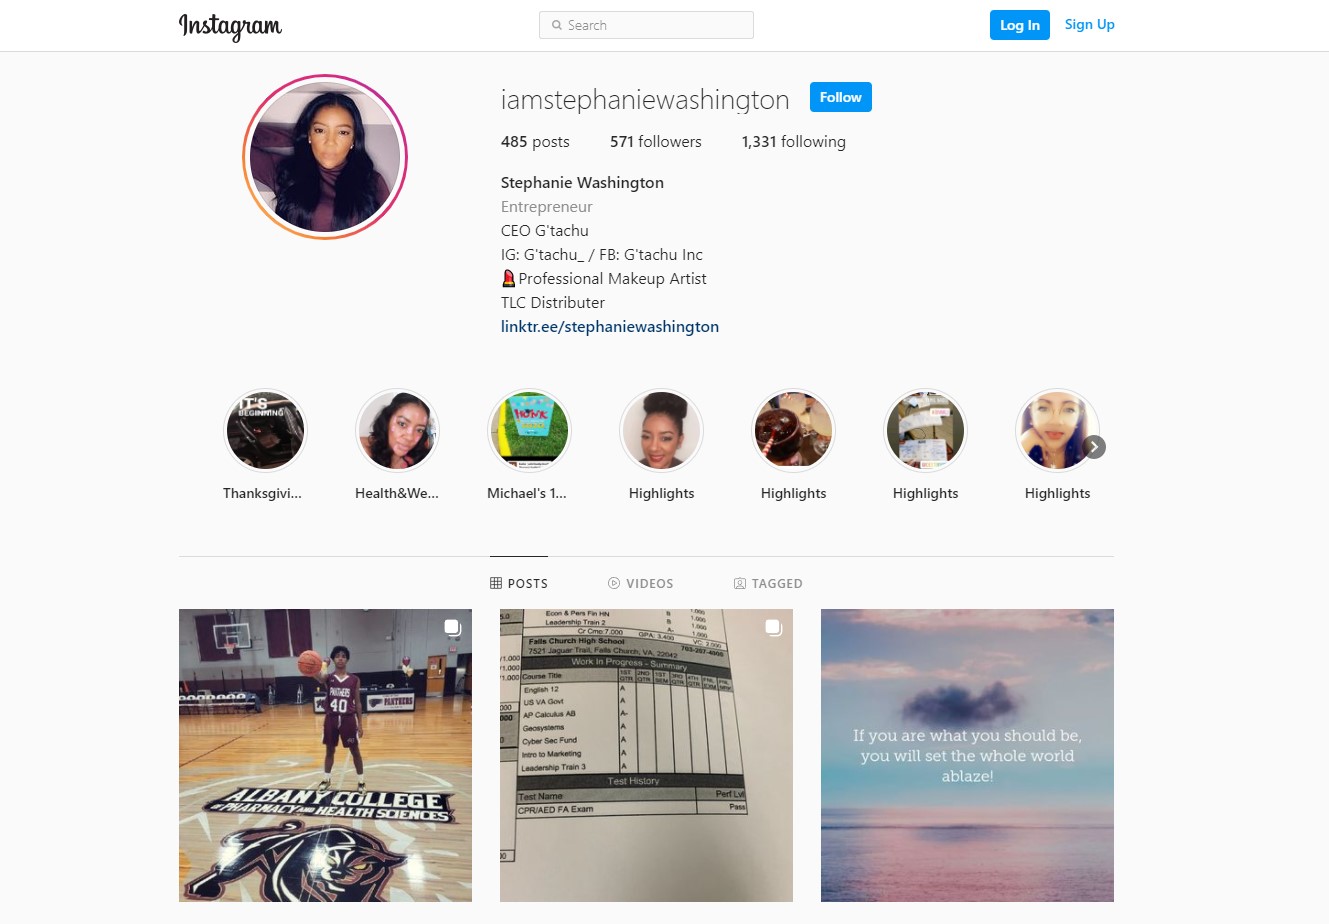 Stephanie has 9046 followers and 857 posts on Instagram, where she goes by the handle "@s washingtonhart2016."